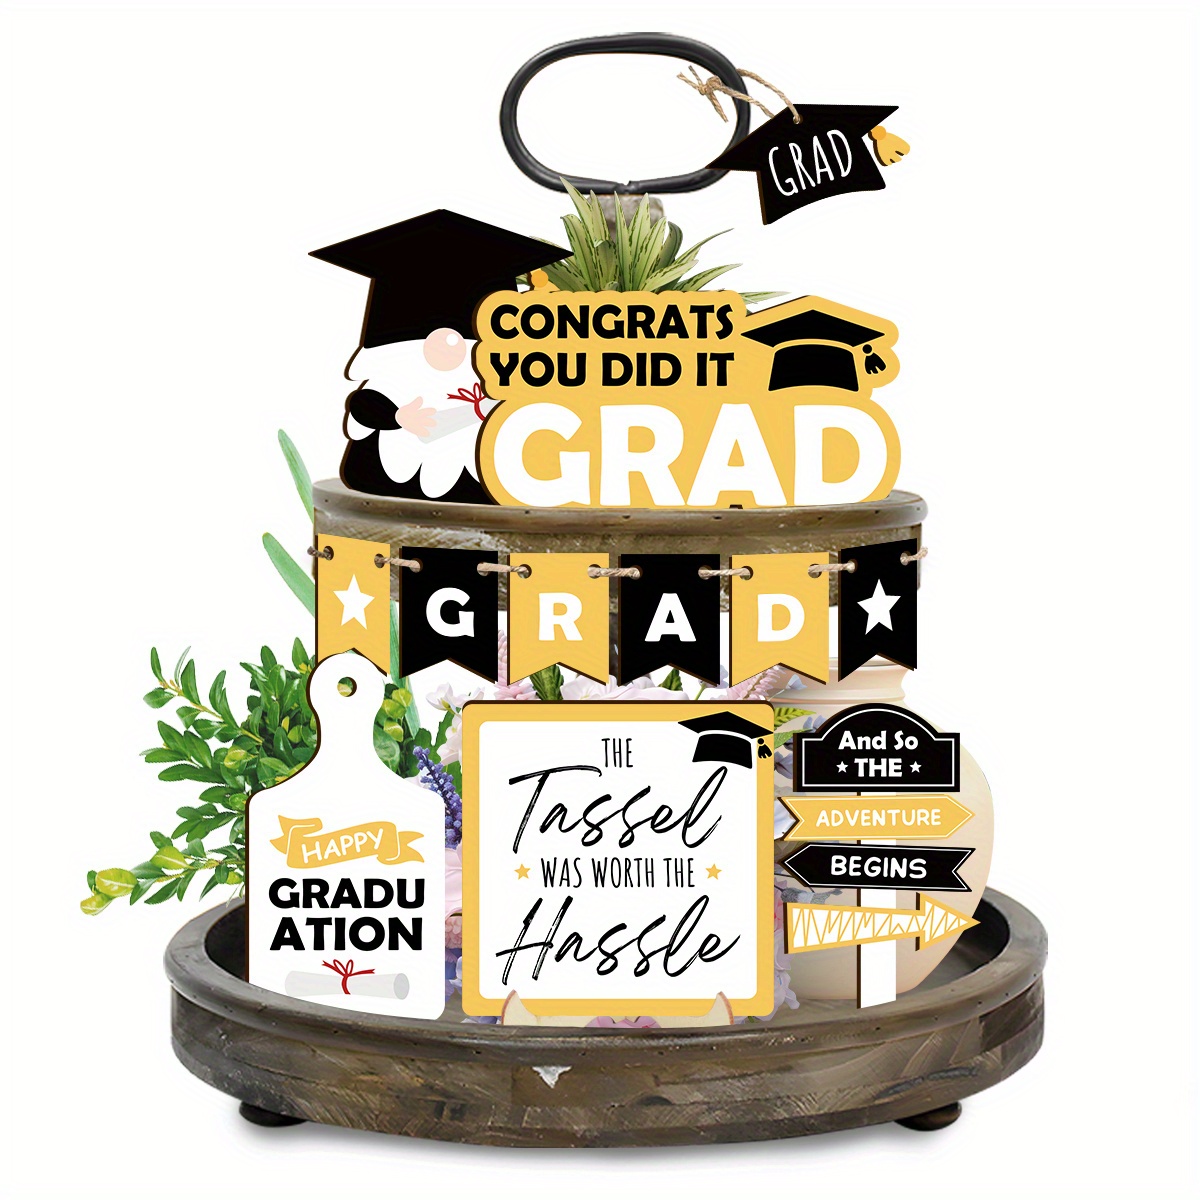 

1 Set 2024 Graduation Tiered Tray Decor Class Of 2024 Wooden Graduate Table Decorations Congrats You Did It Grad Graduation Decor For College Students Graduation Party Gifts (gold, Black)